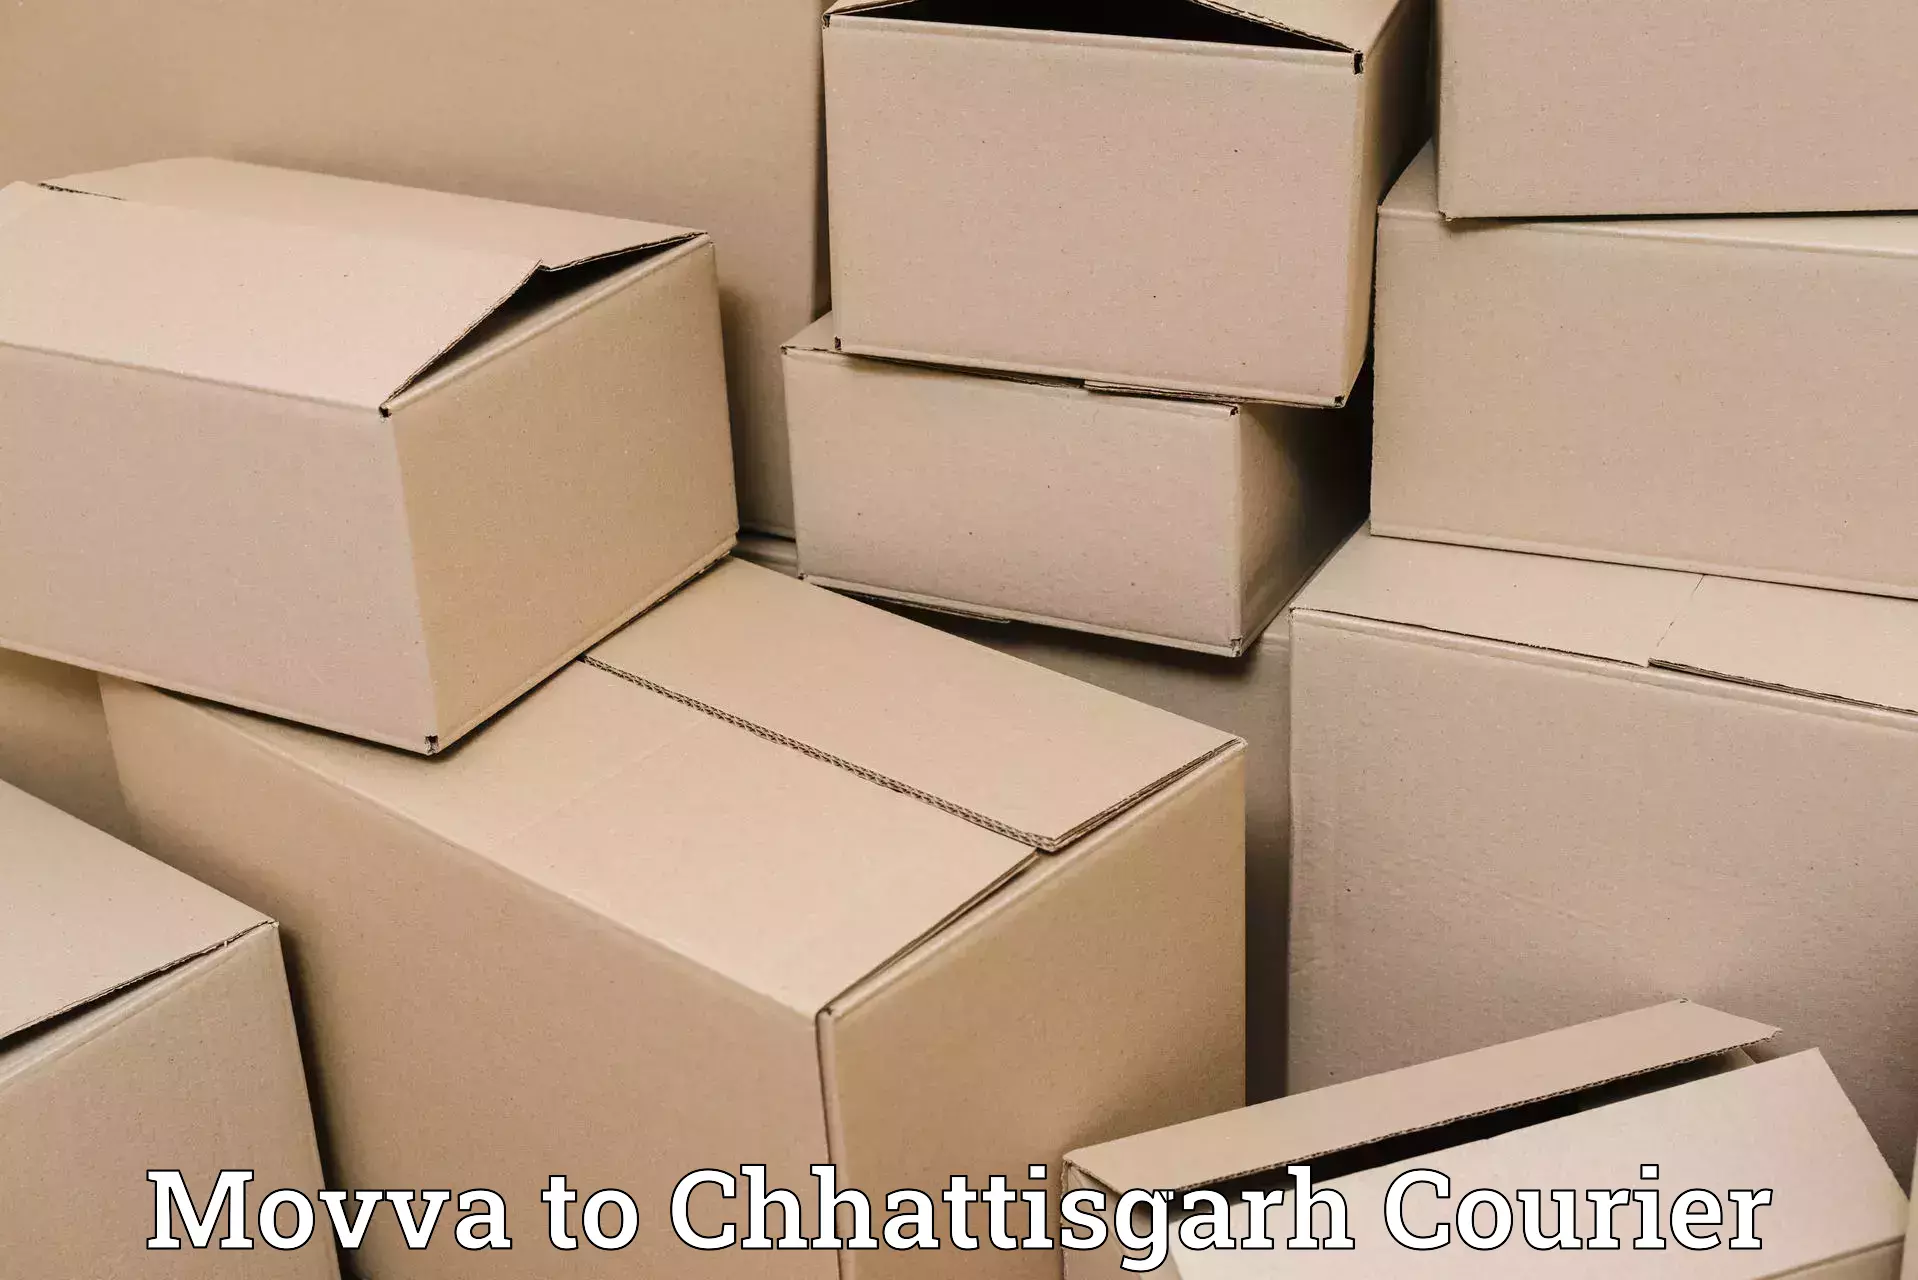 Special handling courier Movva to Raigarh